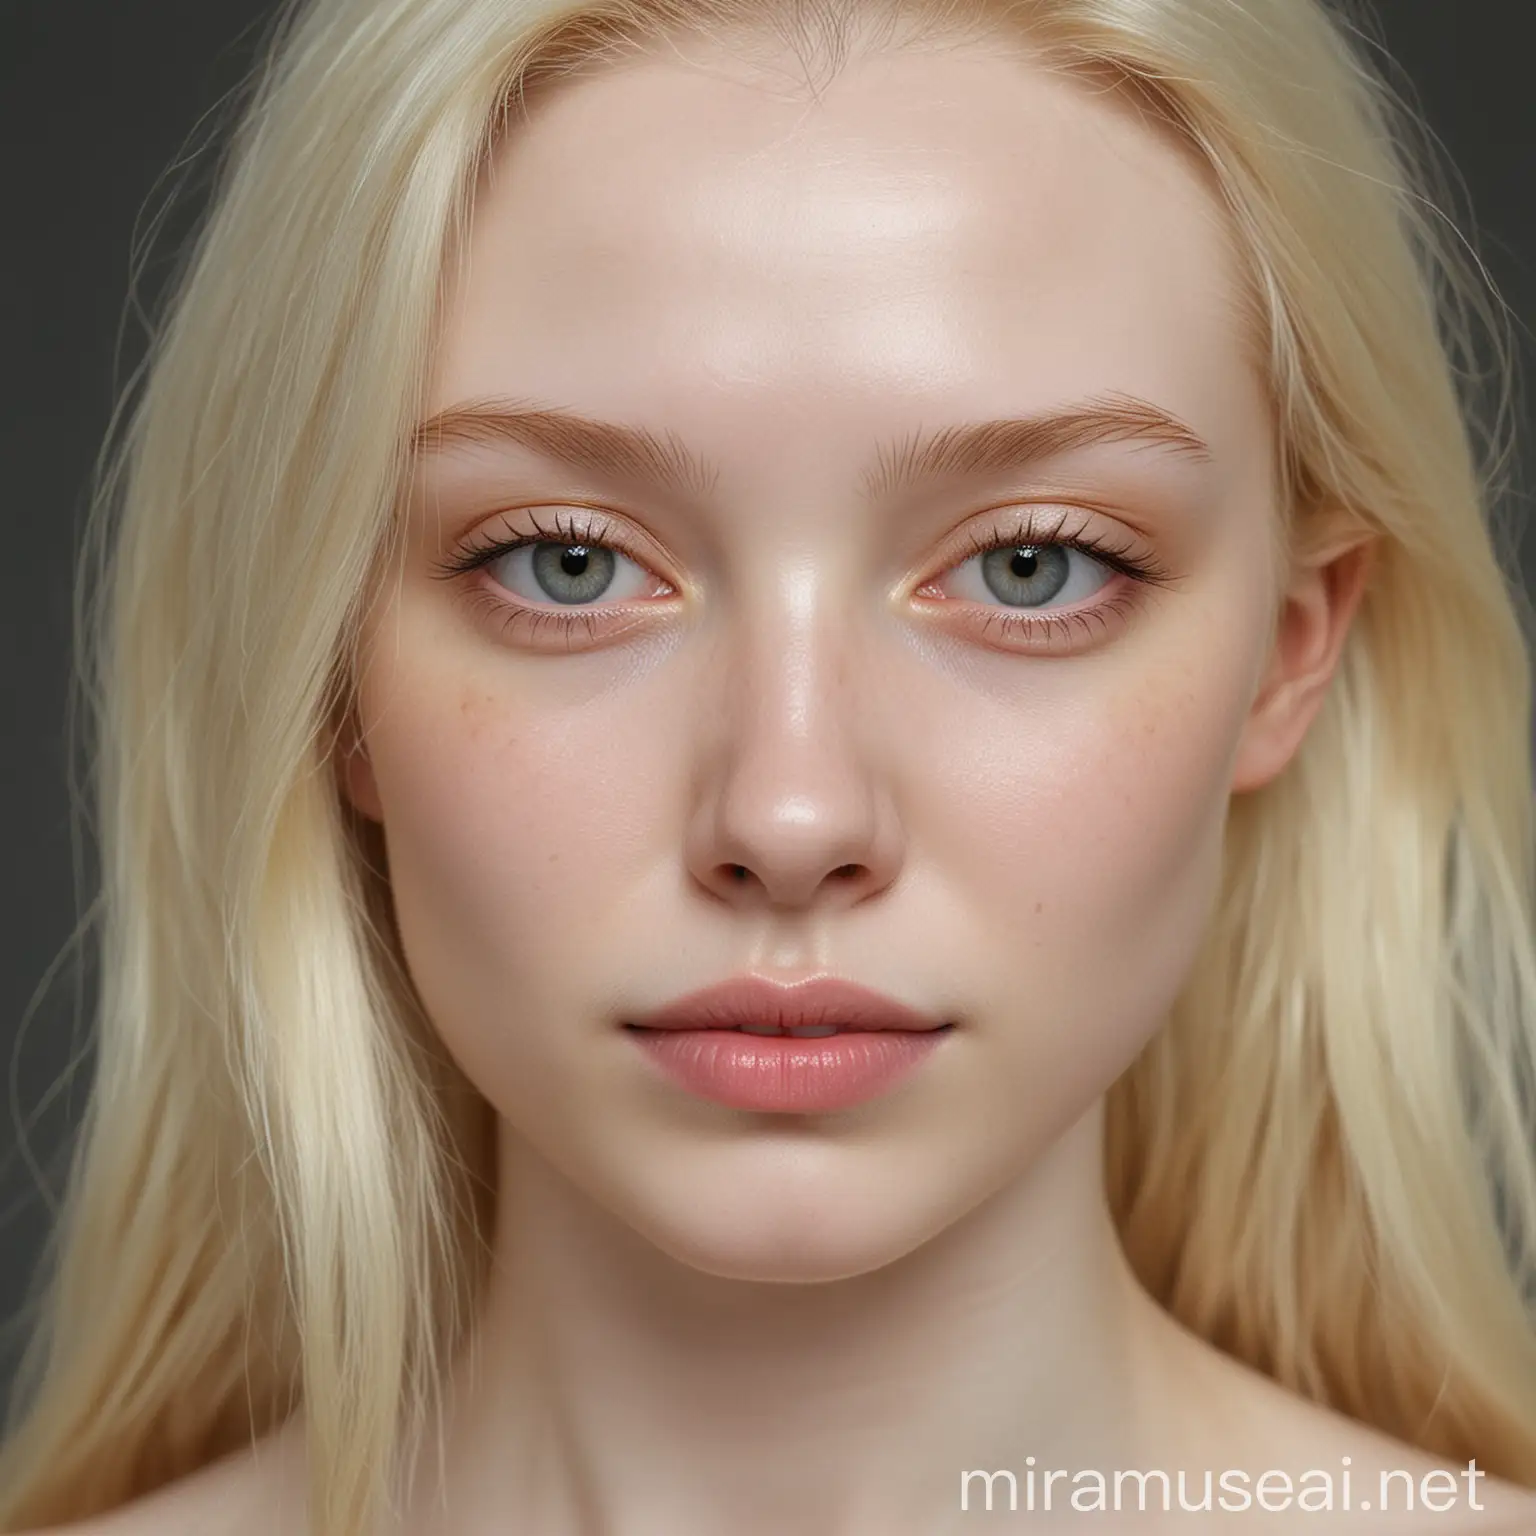 Pale Skinned Woman with Flawless Complexion MakeupFree Portrait